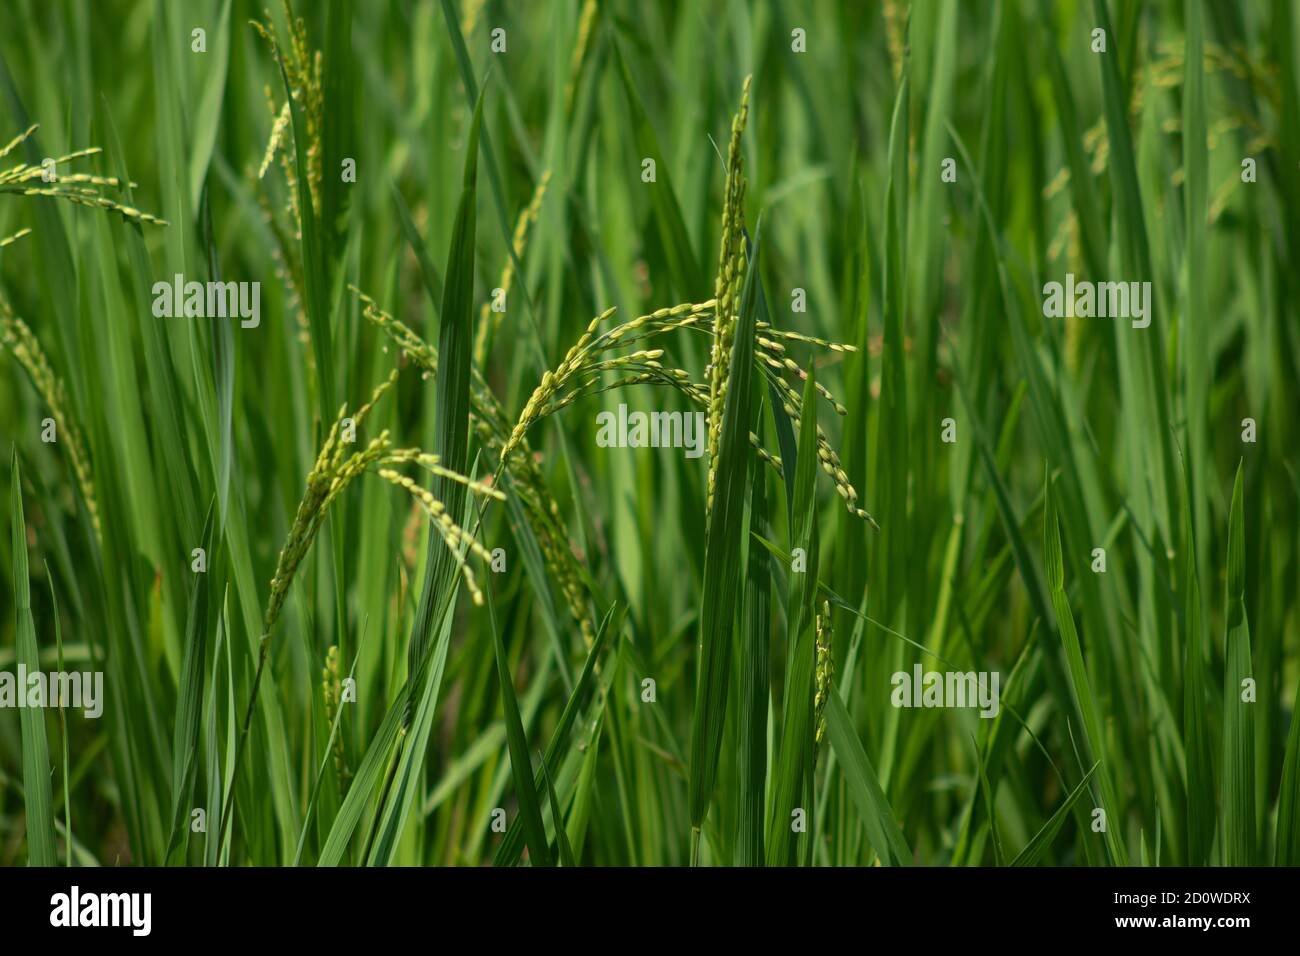 The green paddy or rice plant field in Bangladesh Stock Photo